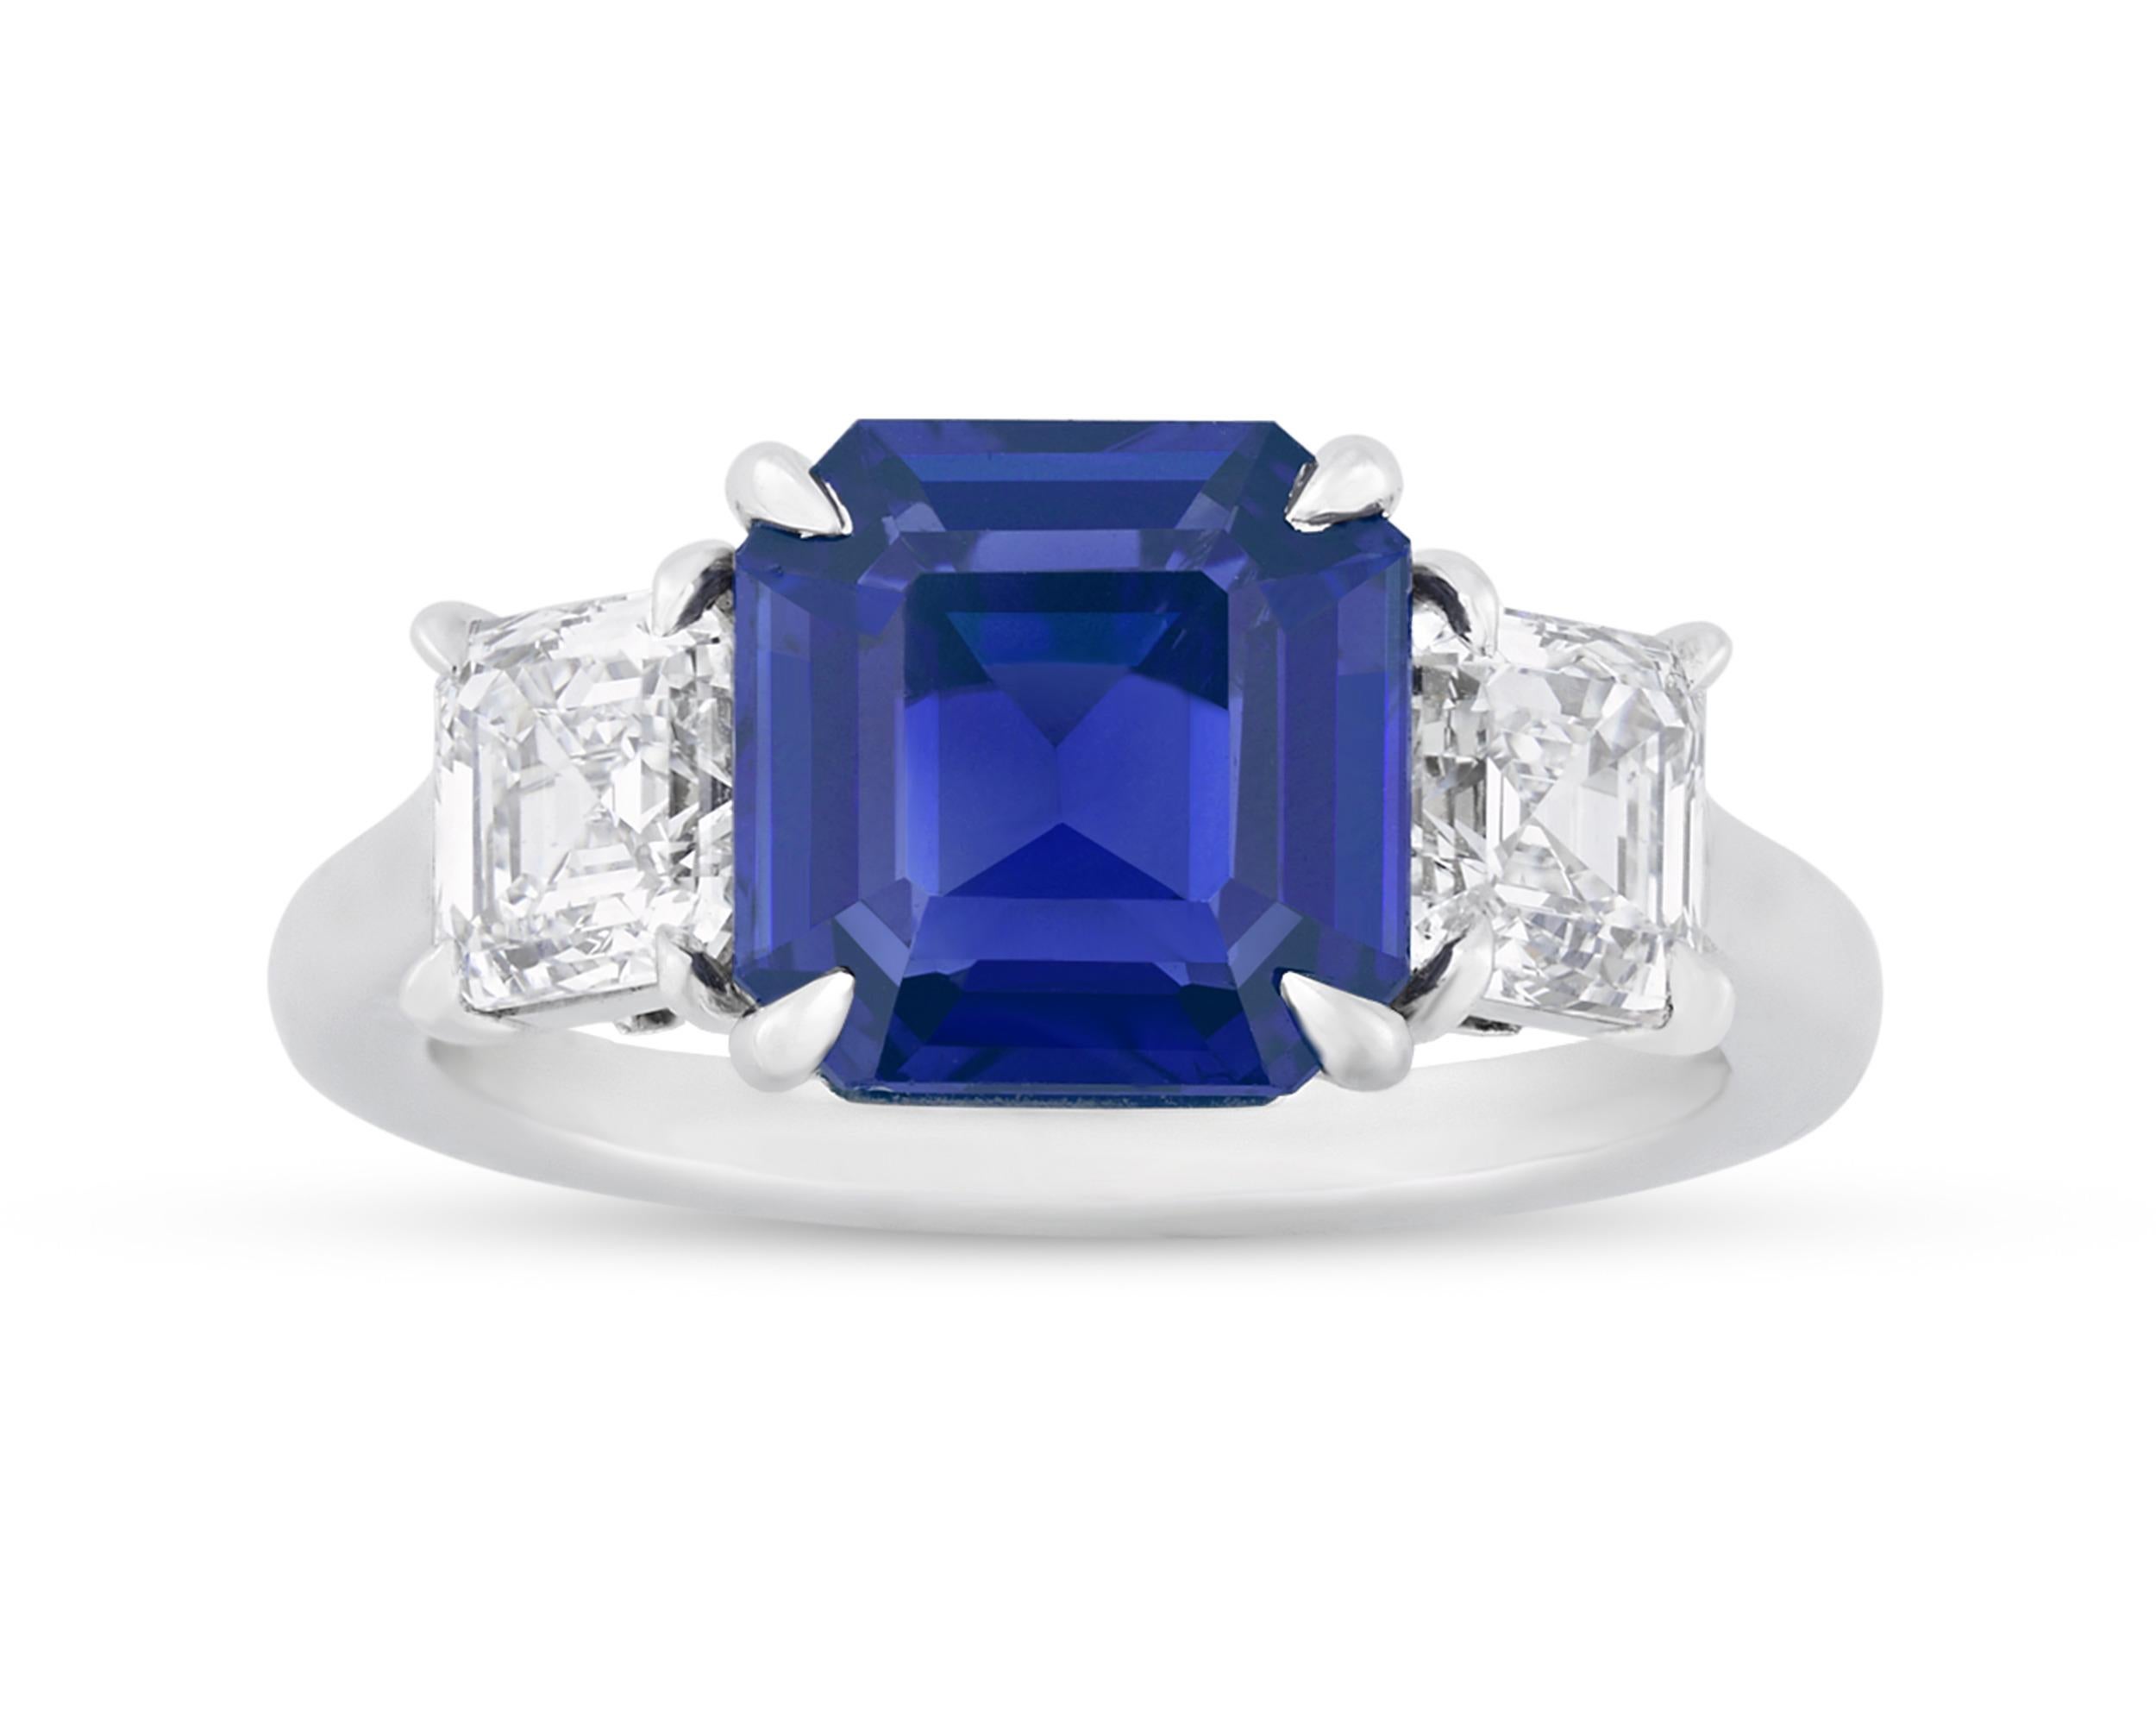 This remarkable octagonal step-cut Kashmir sapphire achieves the deep, velvety blue hue so prized in these gems. Weighing 3.32 carats, the stone's vibrant color is completely natural and perfectly complemented by two emerald-cut white diamonds